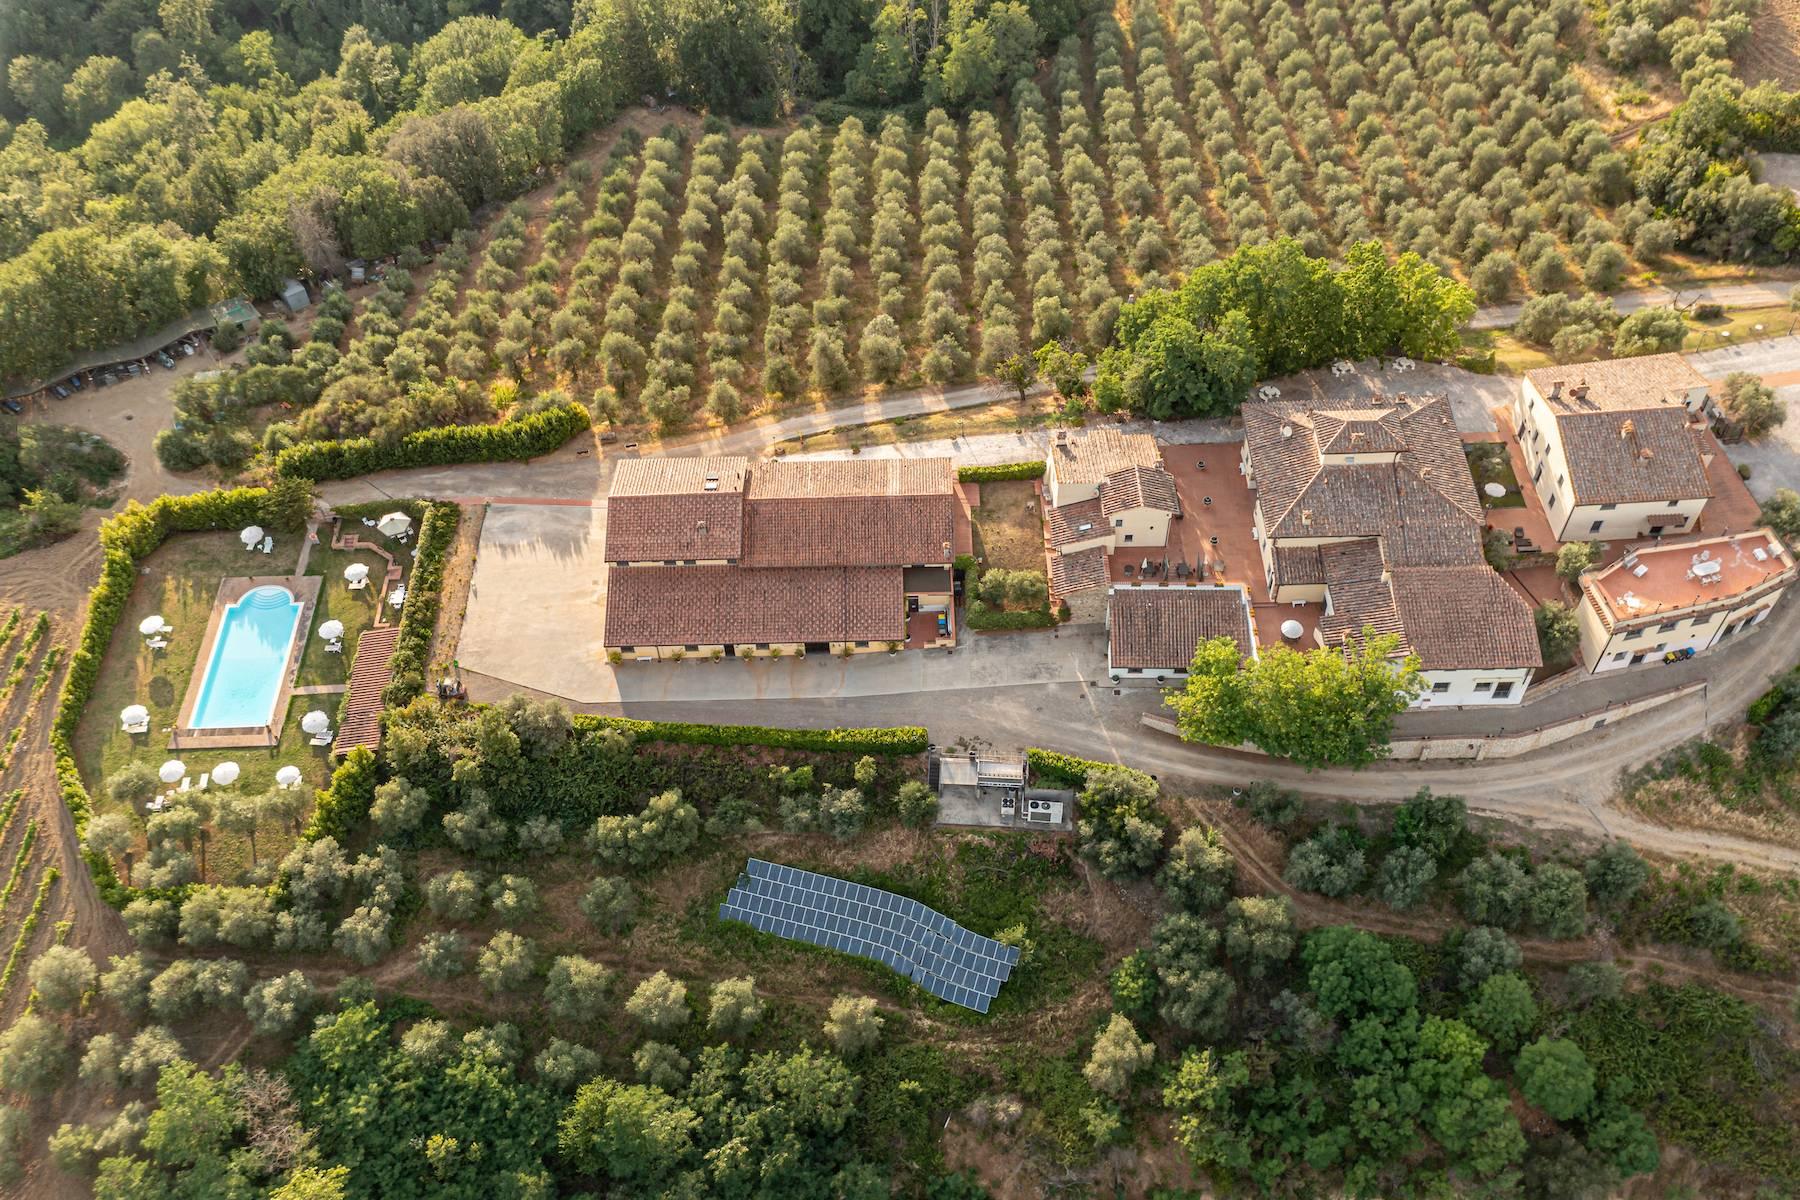 Exceptional agri-resort in Chianti - 3